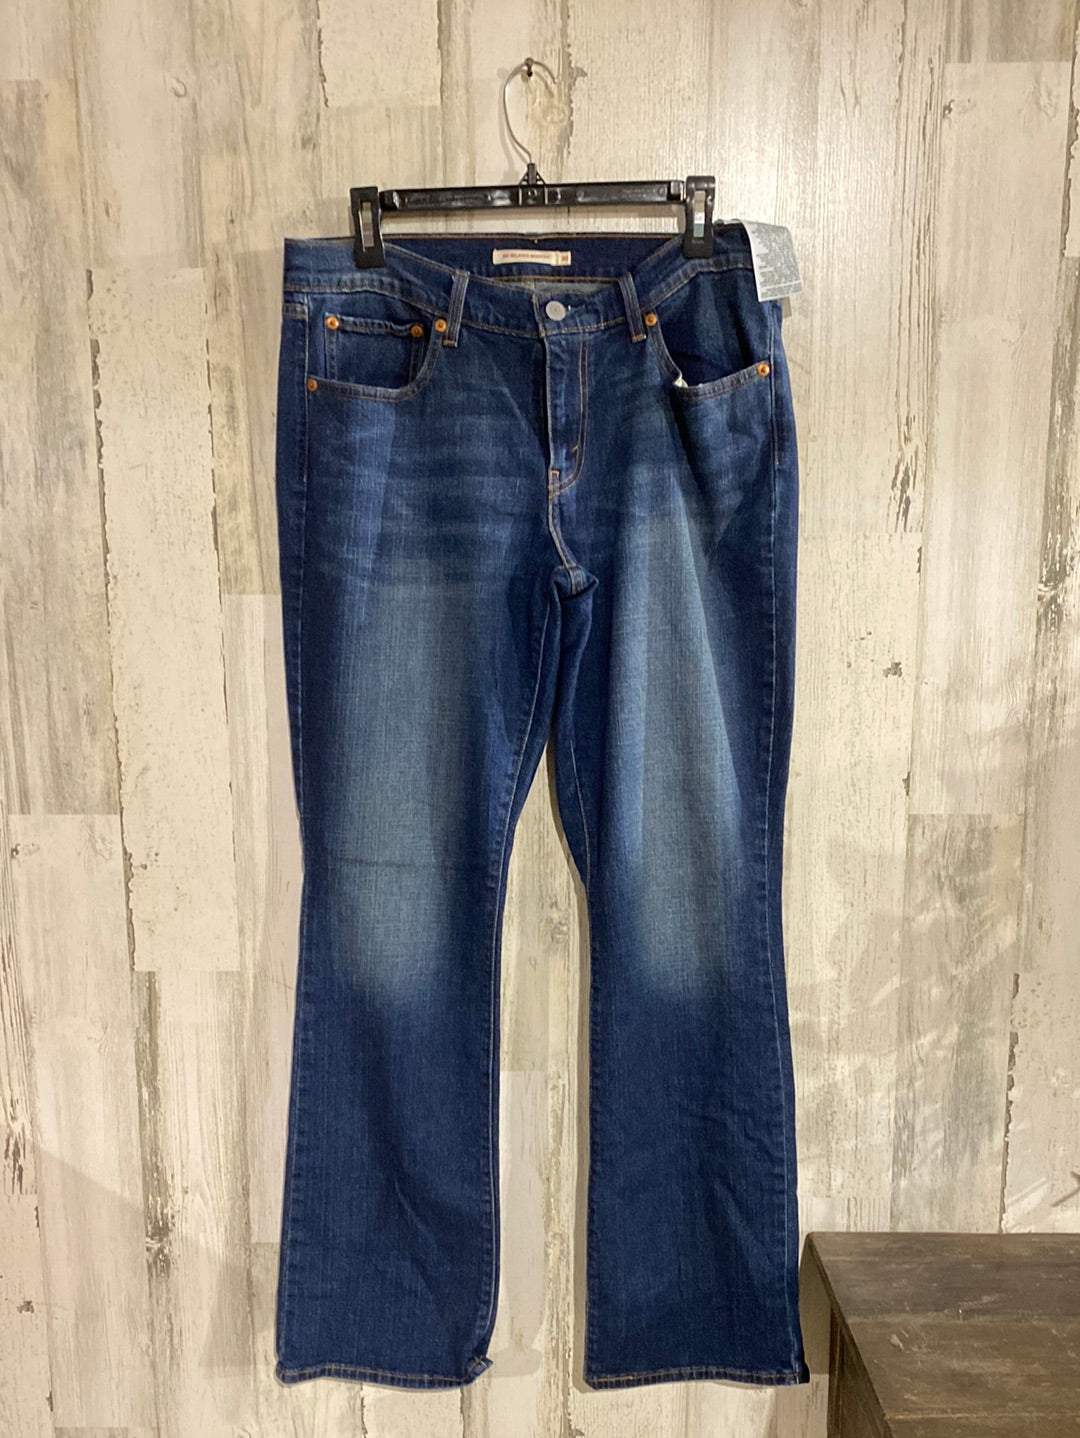 Womens 405 Relaxed Bootcut Levi's Jeans 30 Test * See Desc*